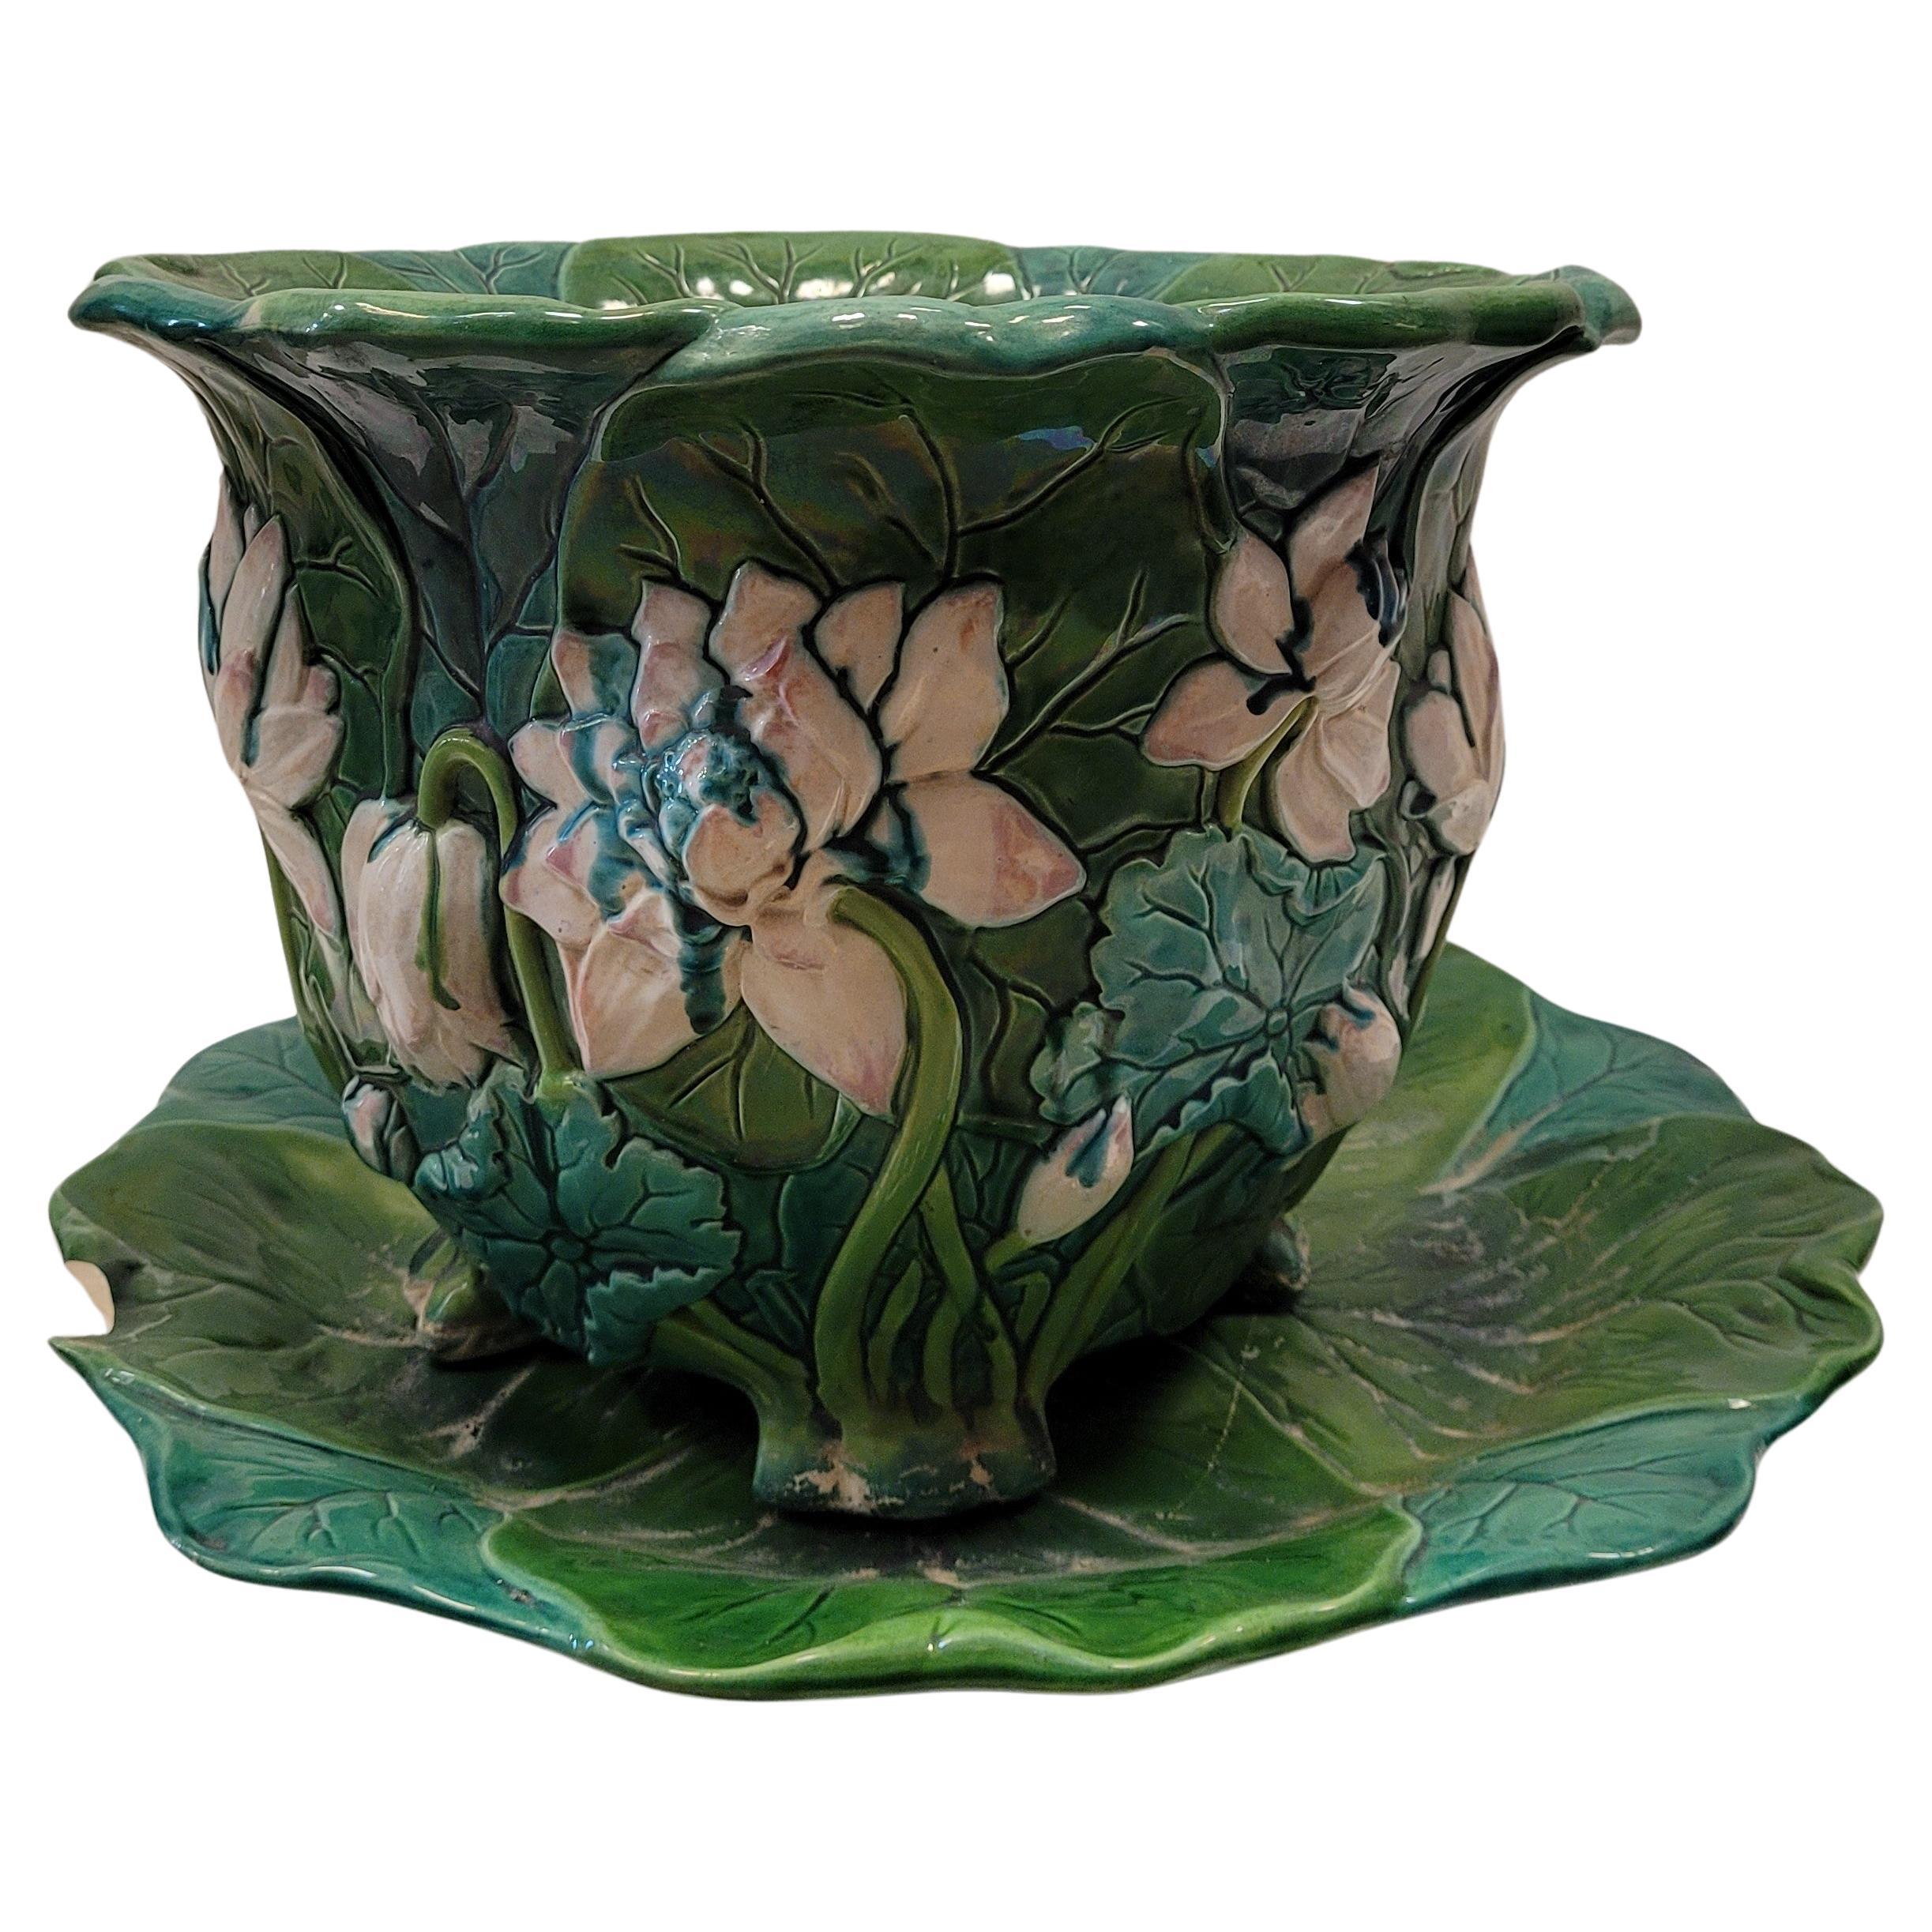 19th -20th Century One of a kind an very gorgeous English Majolica Floral Jardiniere signed Minton with an exuberant waterlily decoration green and white.
With a great plate, measurement 50 cm x 50 cm . Art Nouveau , England
There is a very small